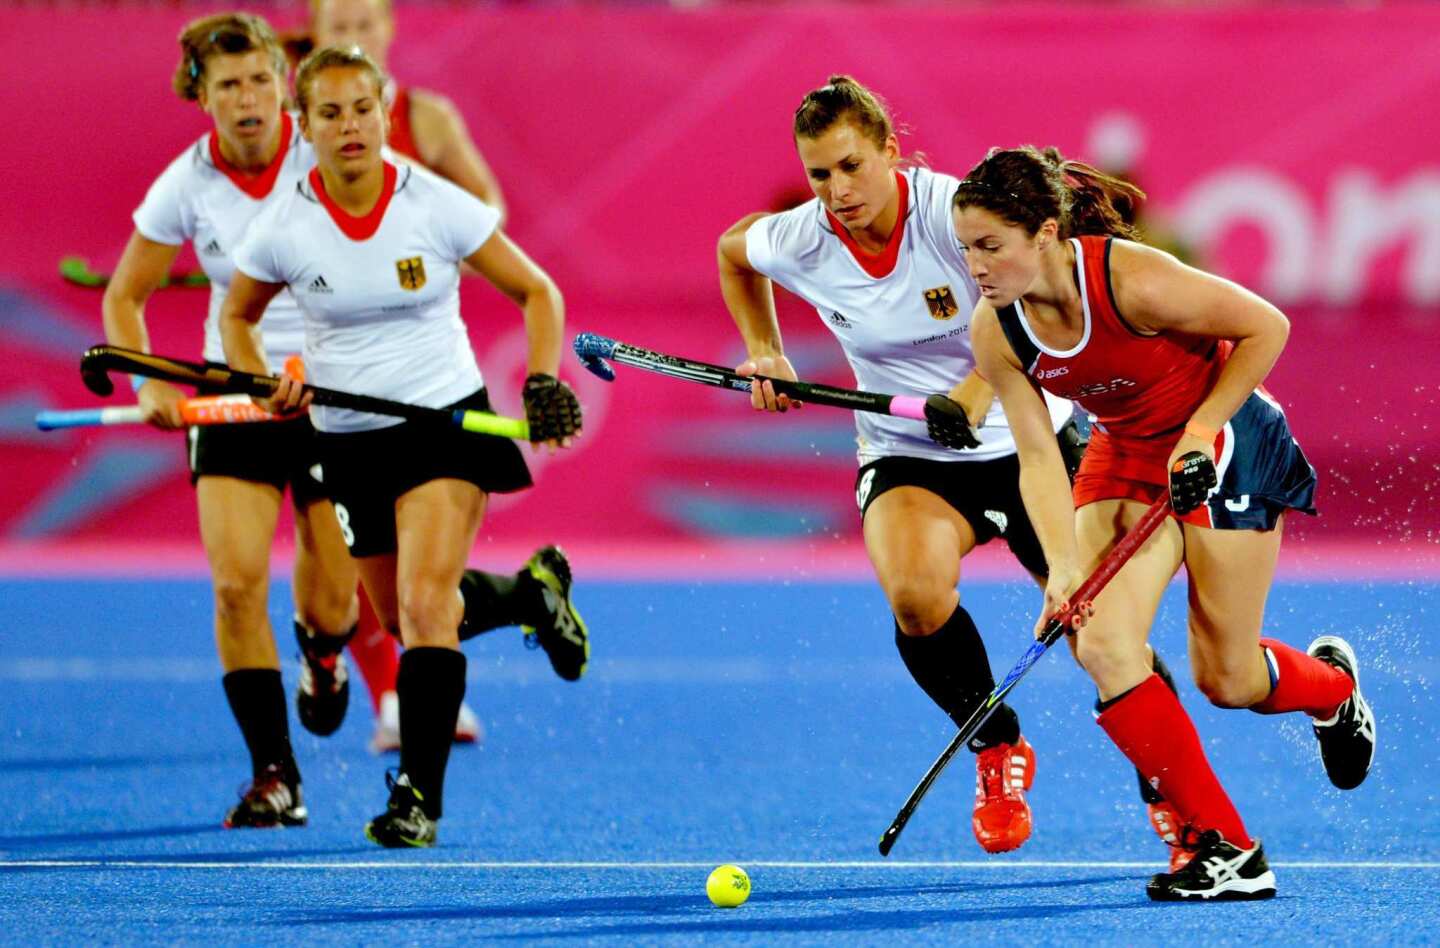 Team USA's Rachel Dawson, right, runs past defenders from Germany during a preliminary round match at the Riverbank Arena.